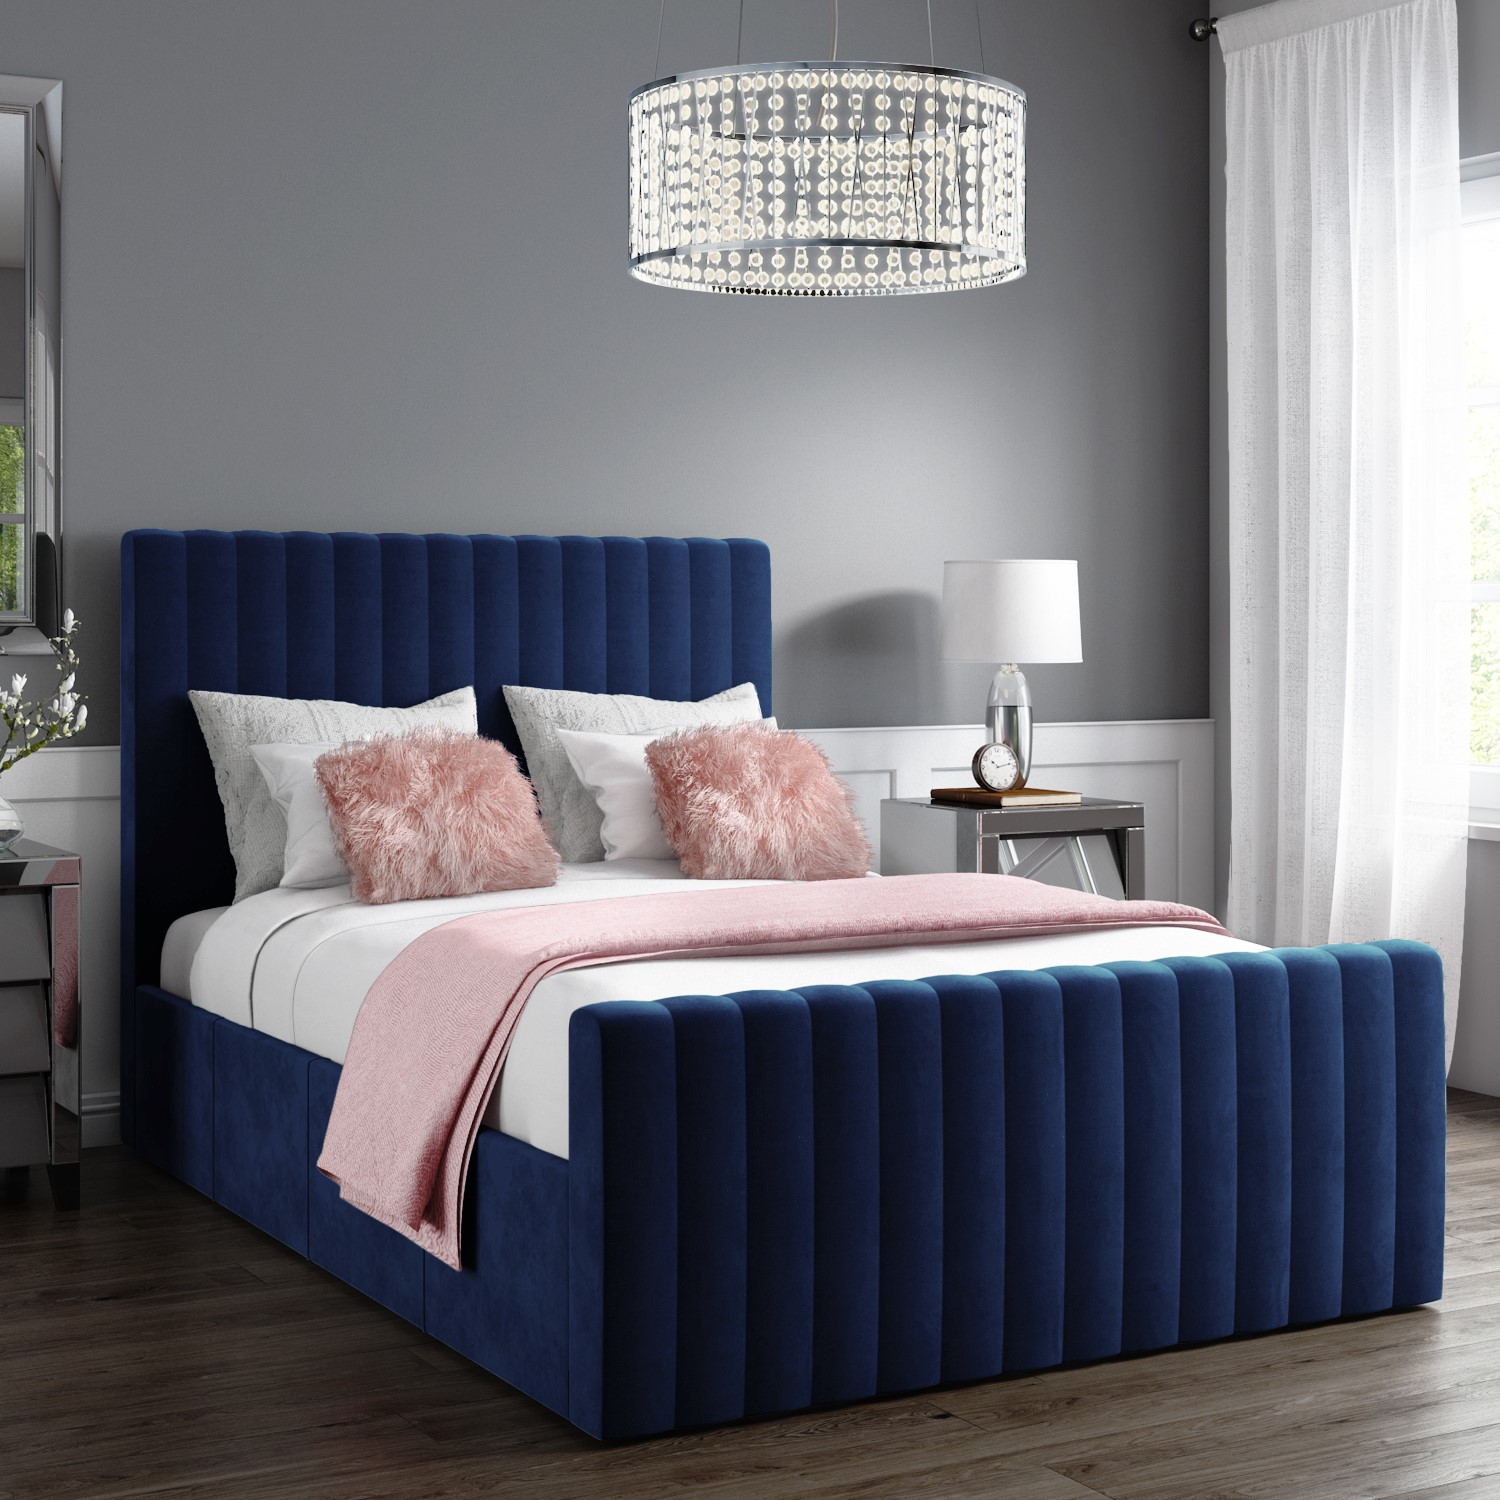 Double Side Opening Ottoman Bed In Navy, Double Sided Bed Frame